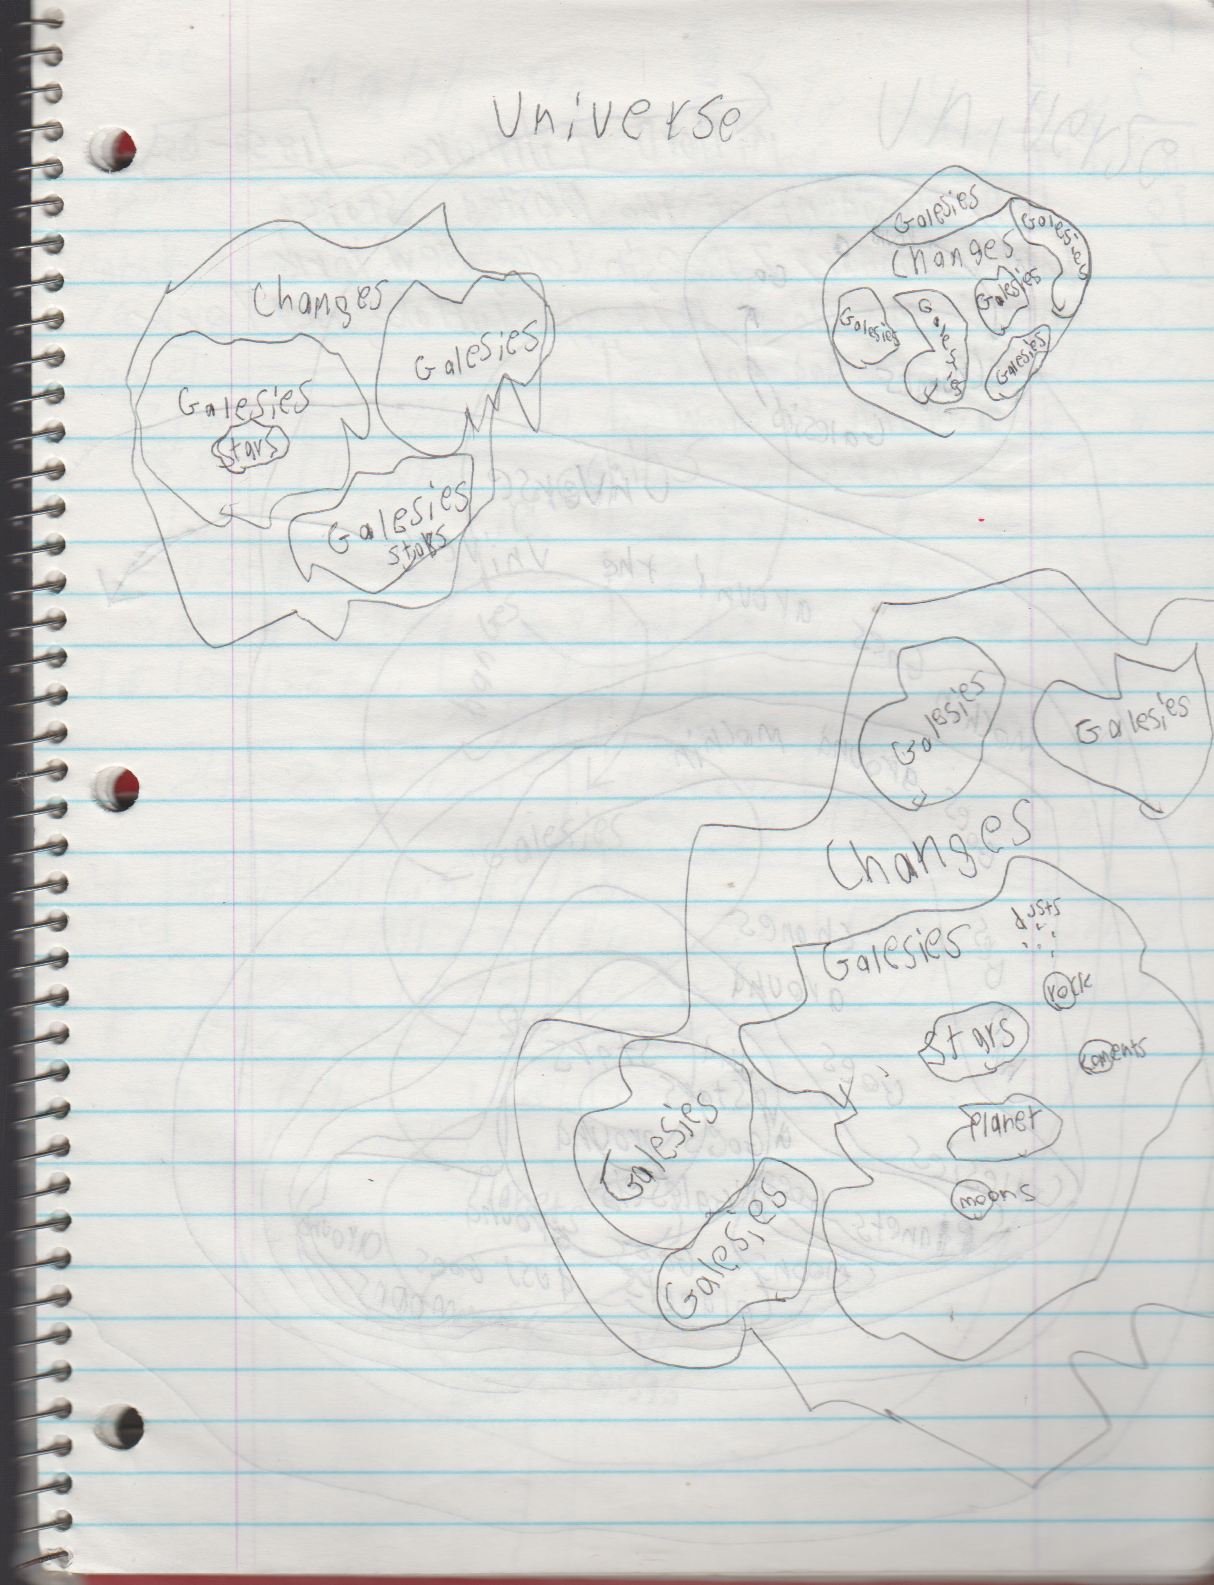 1996-08-18 - Saturday - 11 yr old Joey Arnold's School Book, dates through to 1998 apx, mostly 96, Writings, Drawings, Etc-029.png